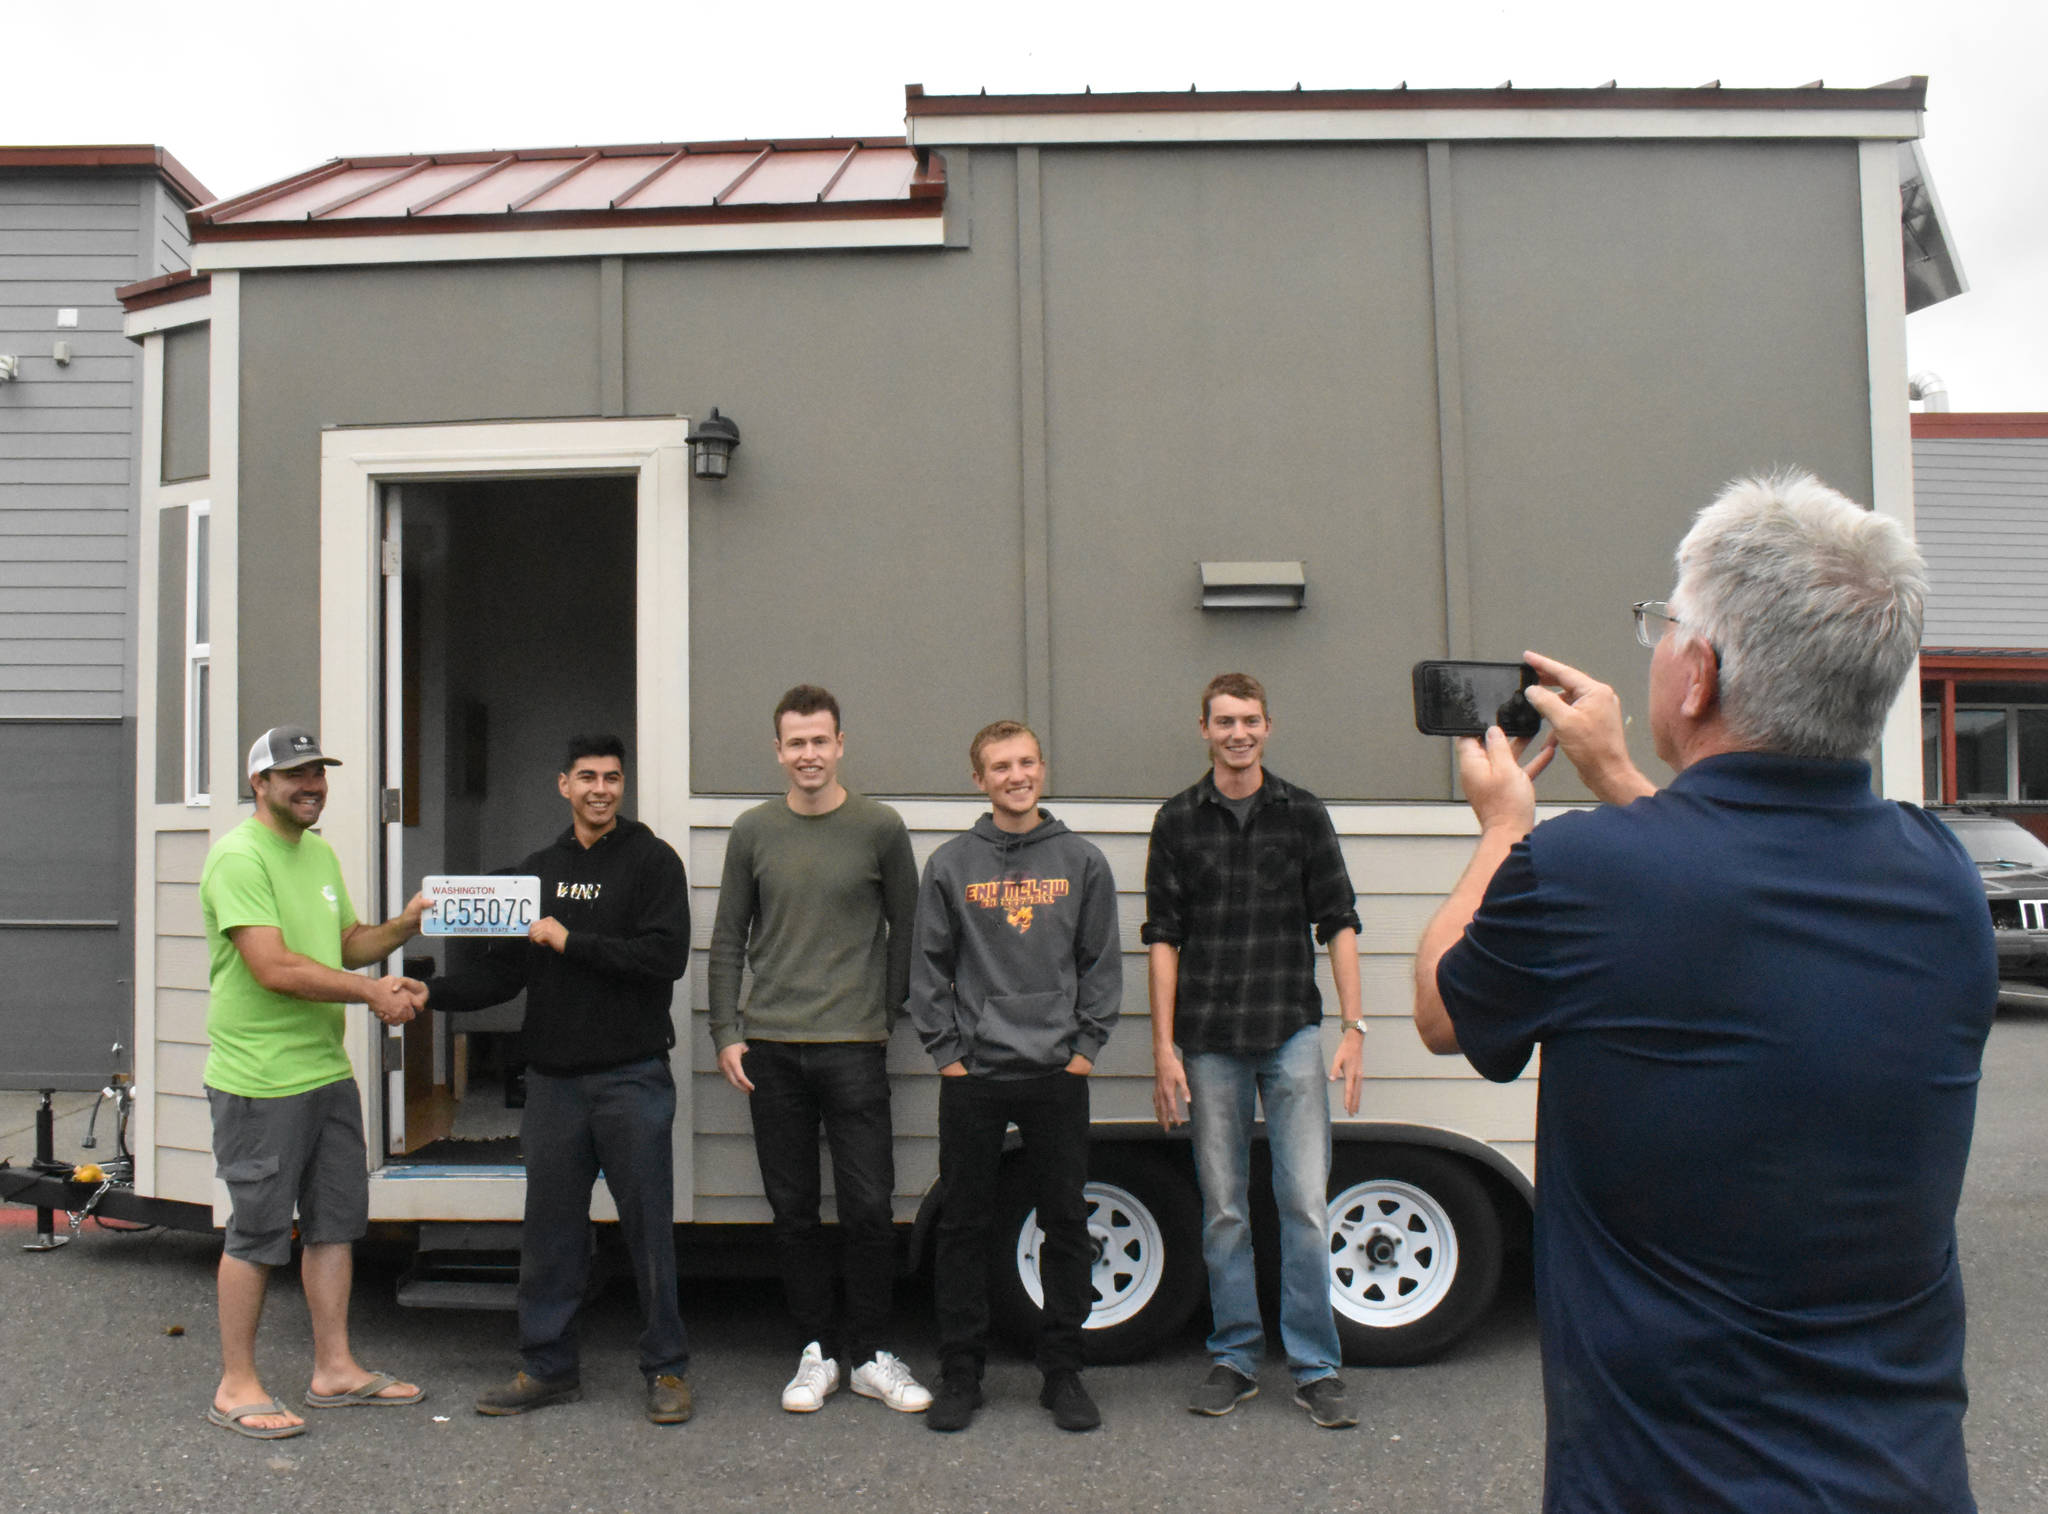 PHOTO BY KEVIN HANSON 
Former EHS teacher Bob Kilmer snaps a photo of the tiny house his students created. The home will now used by those advocating for small-home living. Some of the students involved in the project gathered Friday with Todd McKellips (left), director of the Washington Tiny House Association.